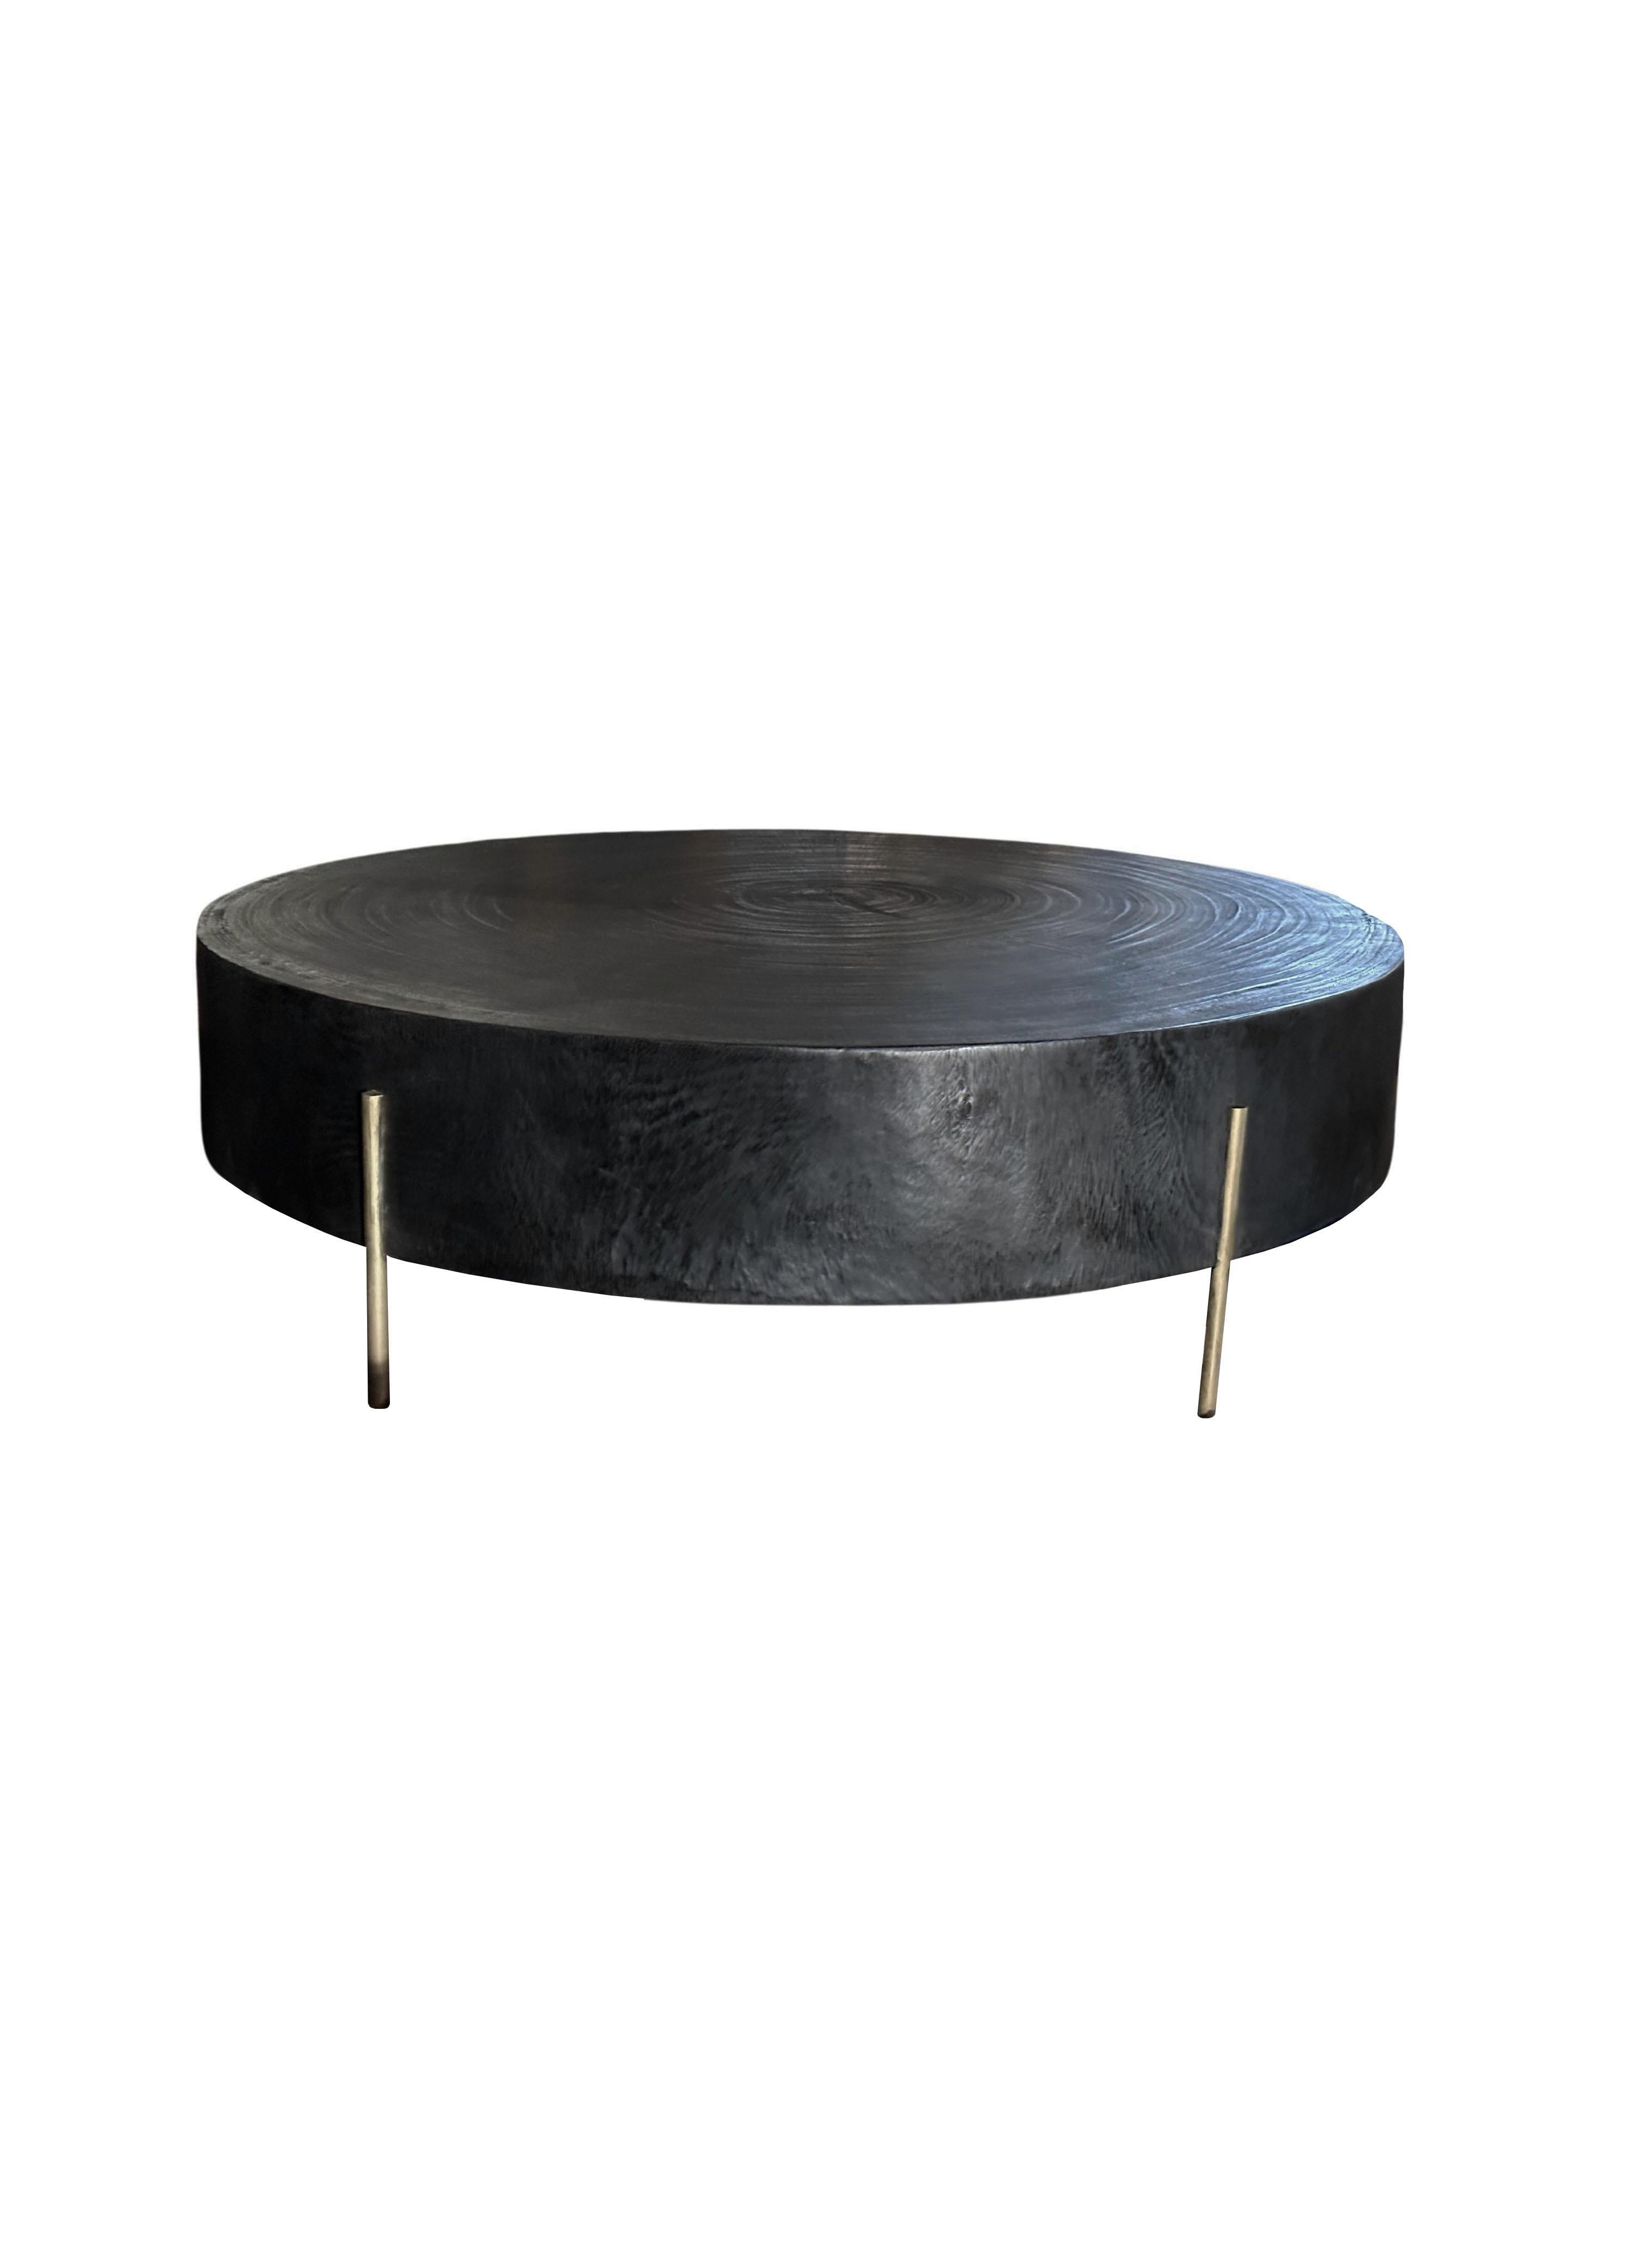 Indonesian Modern Organic Side Table Crafted from Mango Wood with Brass Legs, Burnt Finish For Sale